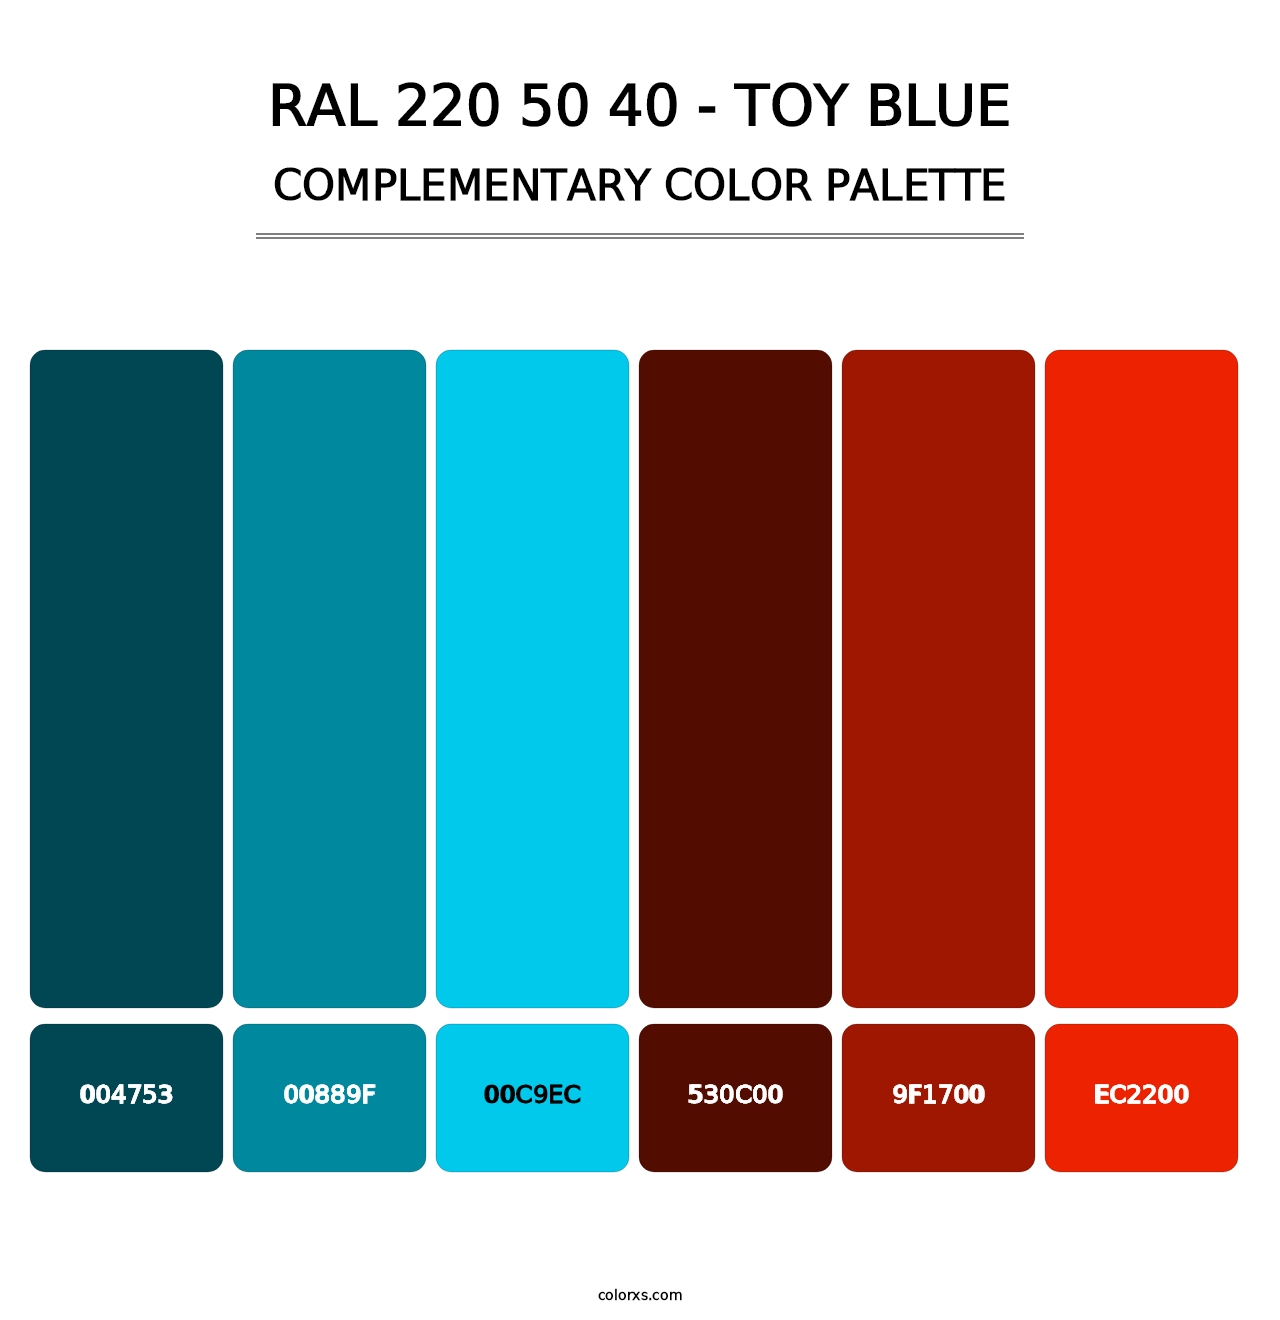 RAL 220 50 40 - Toy Blue - Complementary Color Palette